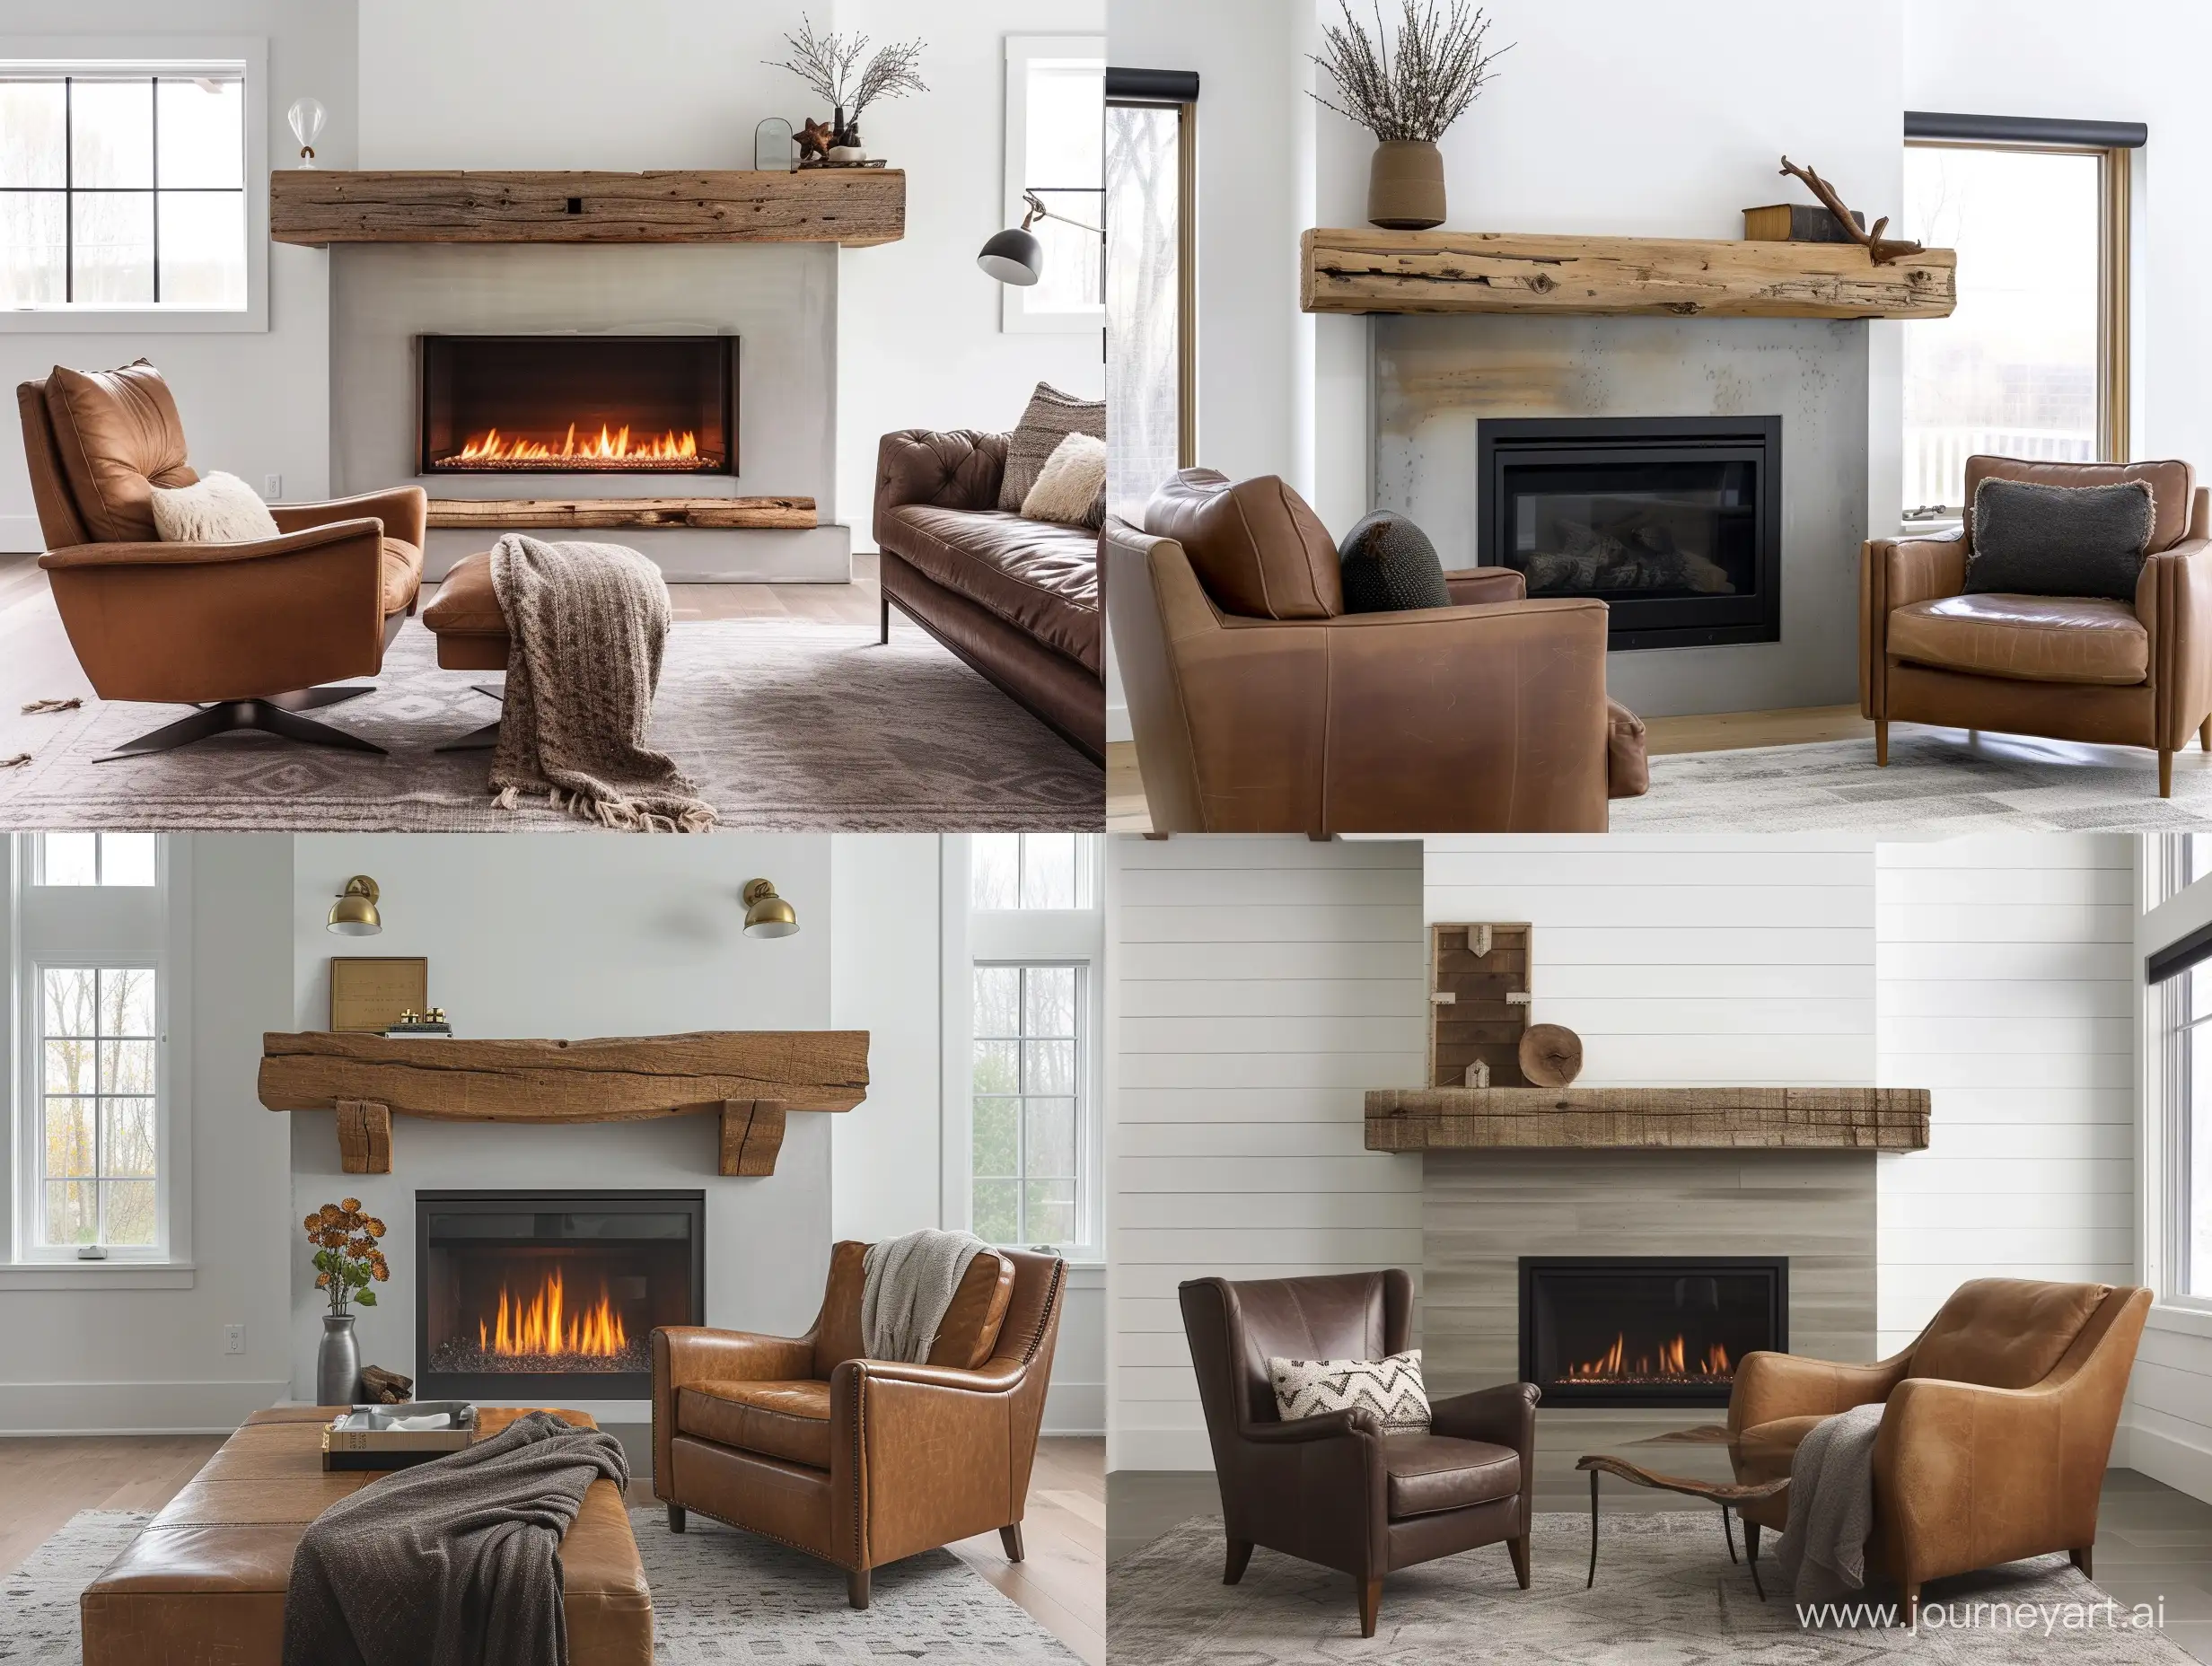 Modern farmhouse sImple living room with minimal decor gas fireplace with a raw edge wooden mantel brown leather armchair and sofa --v 6 --ar 4:3 --no 41977